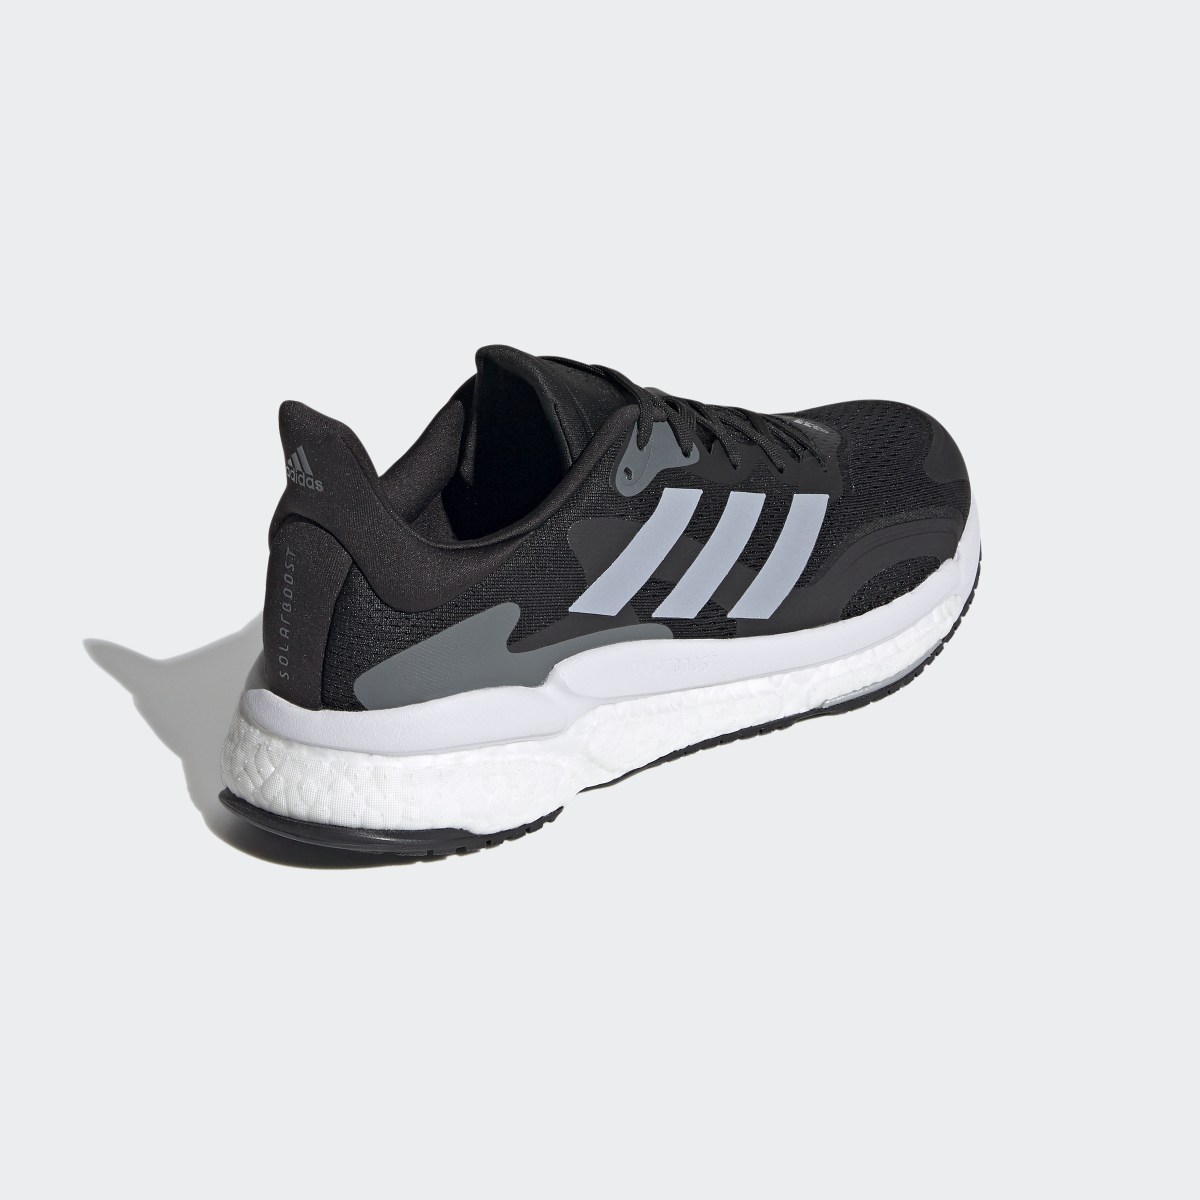 Adidas SolarBoost 3 Shoes. 7